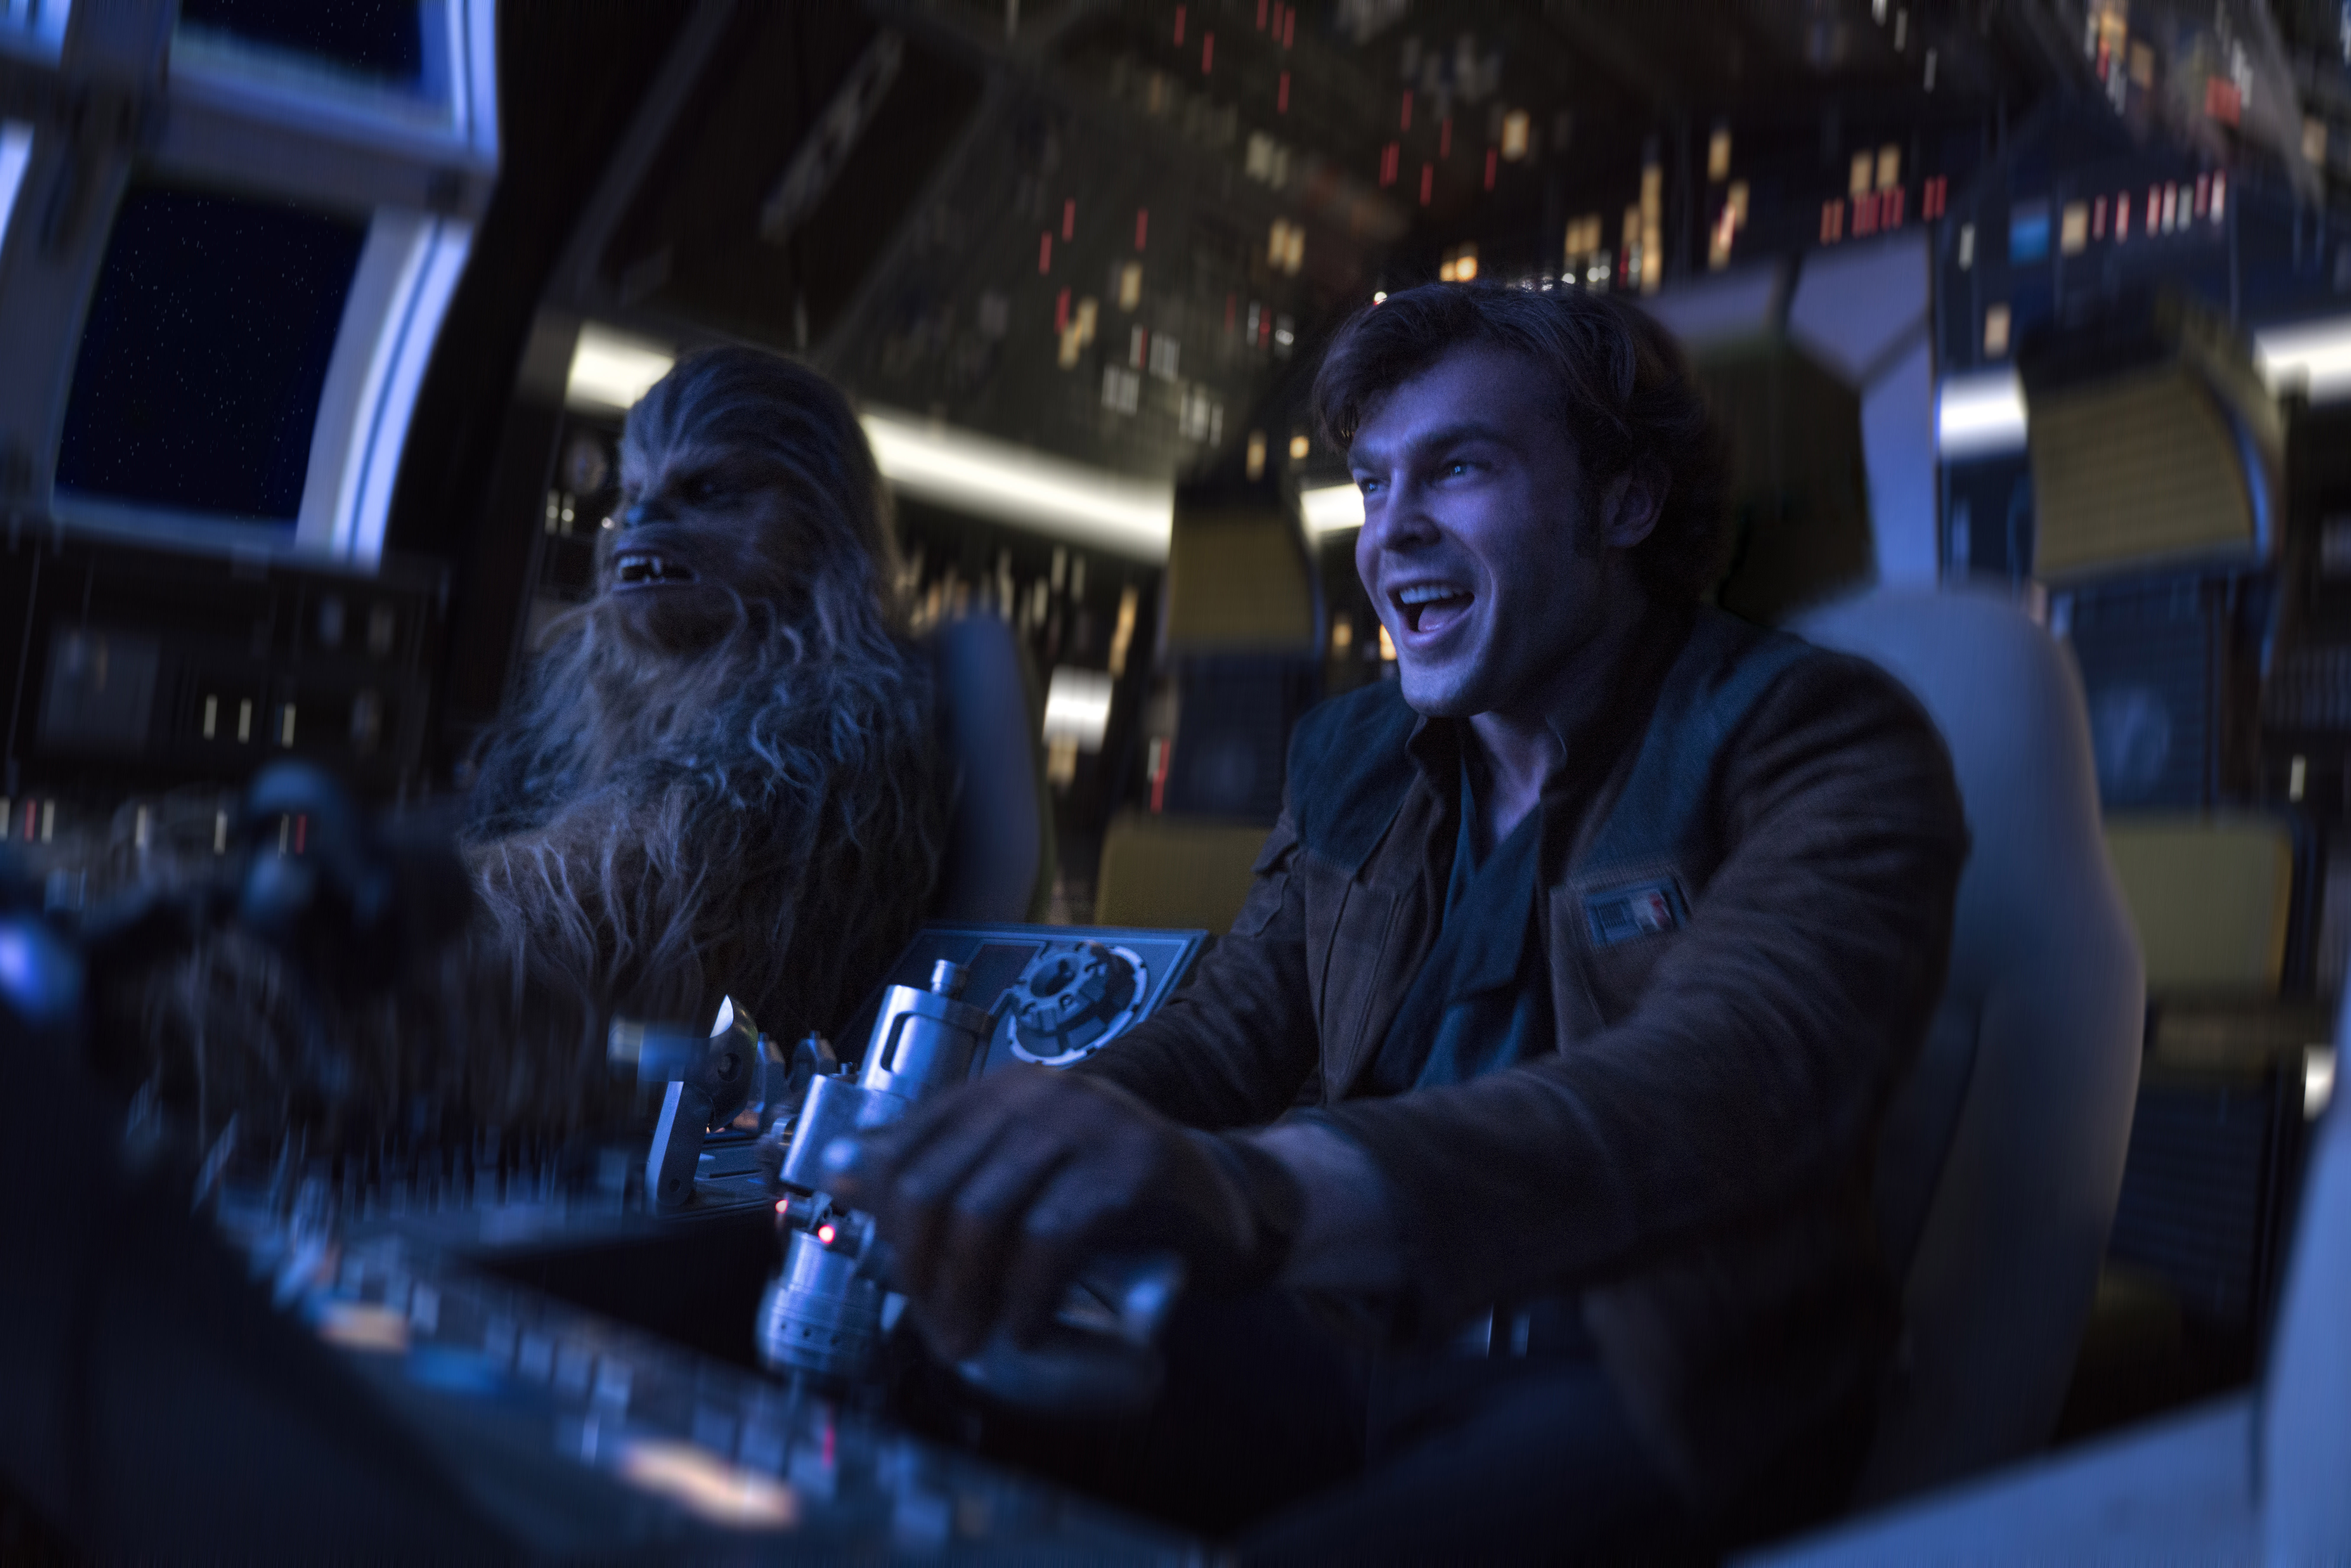 Hd Wallpaper - Solo A Star Wars Story Review , HD Wallpaper & Backgrounds